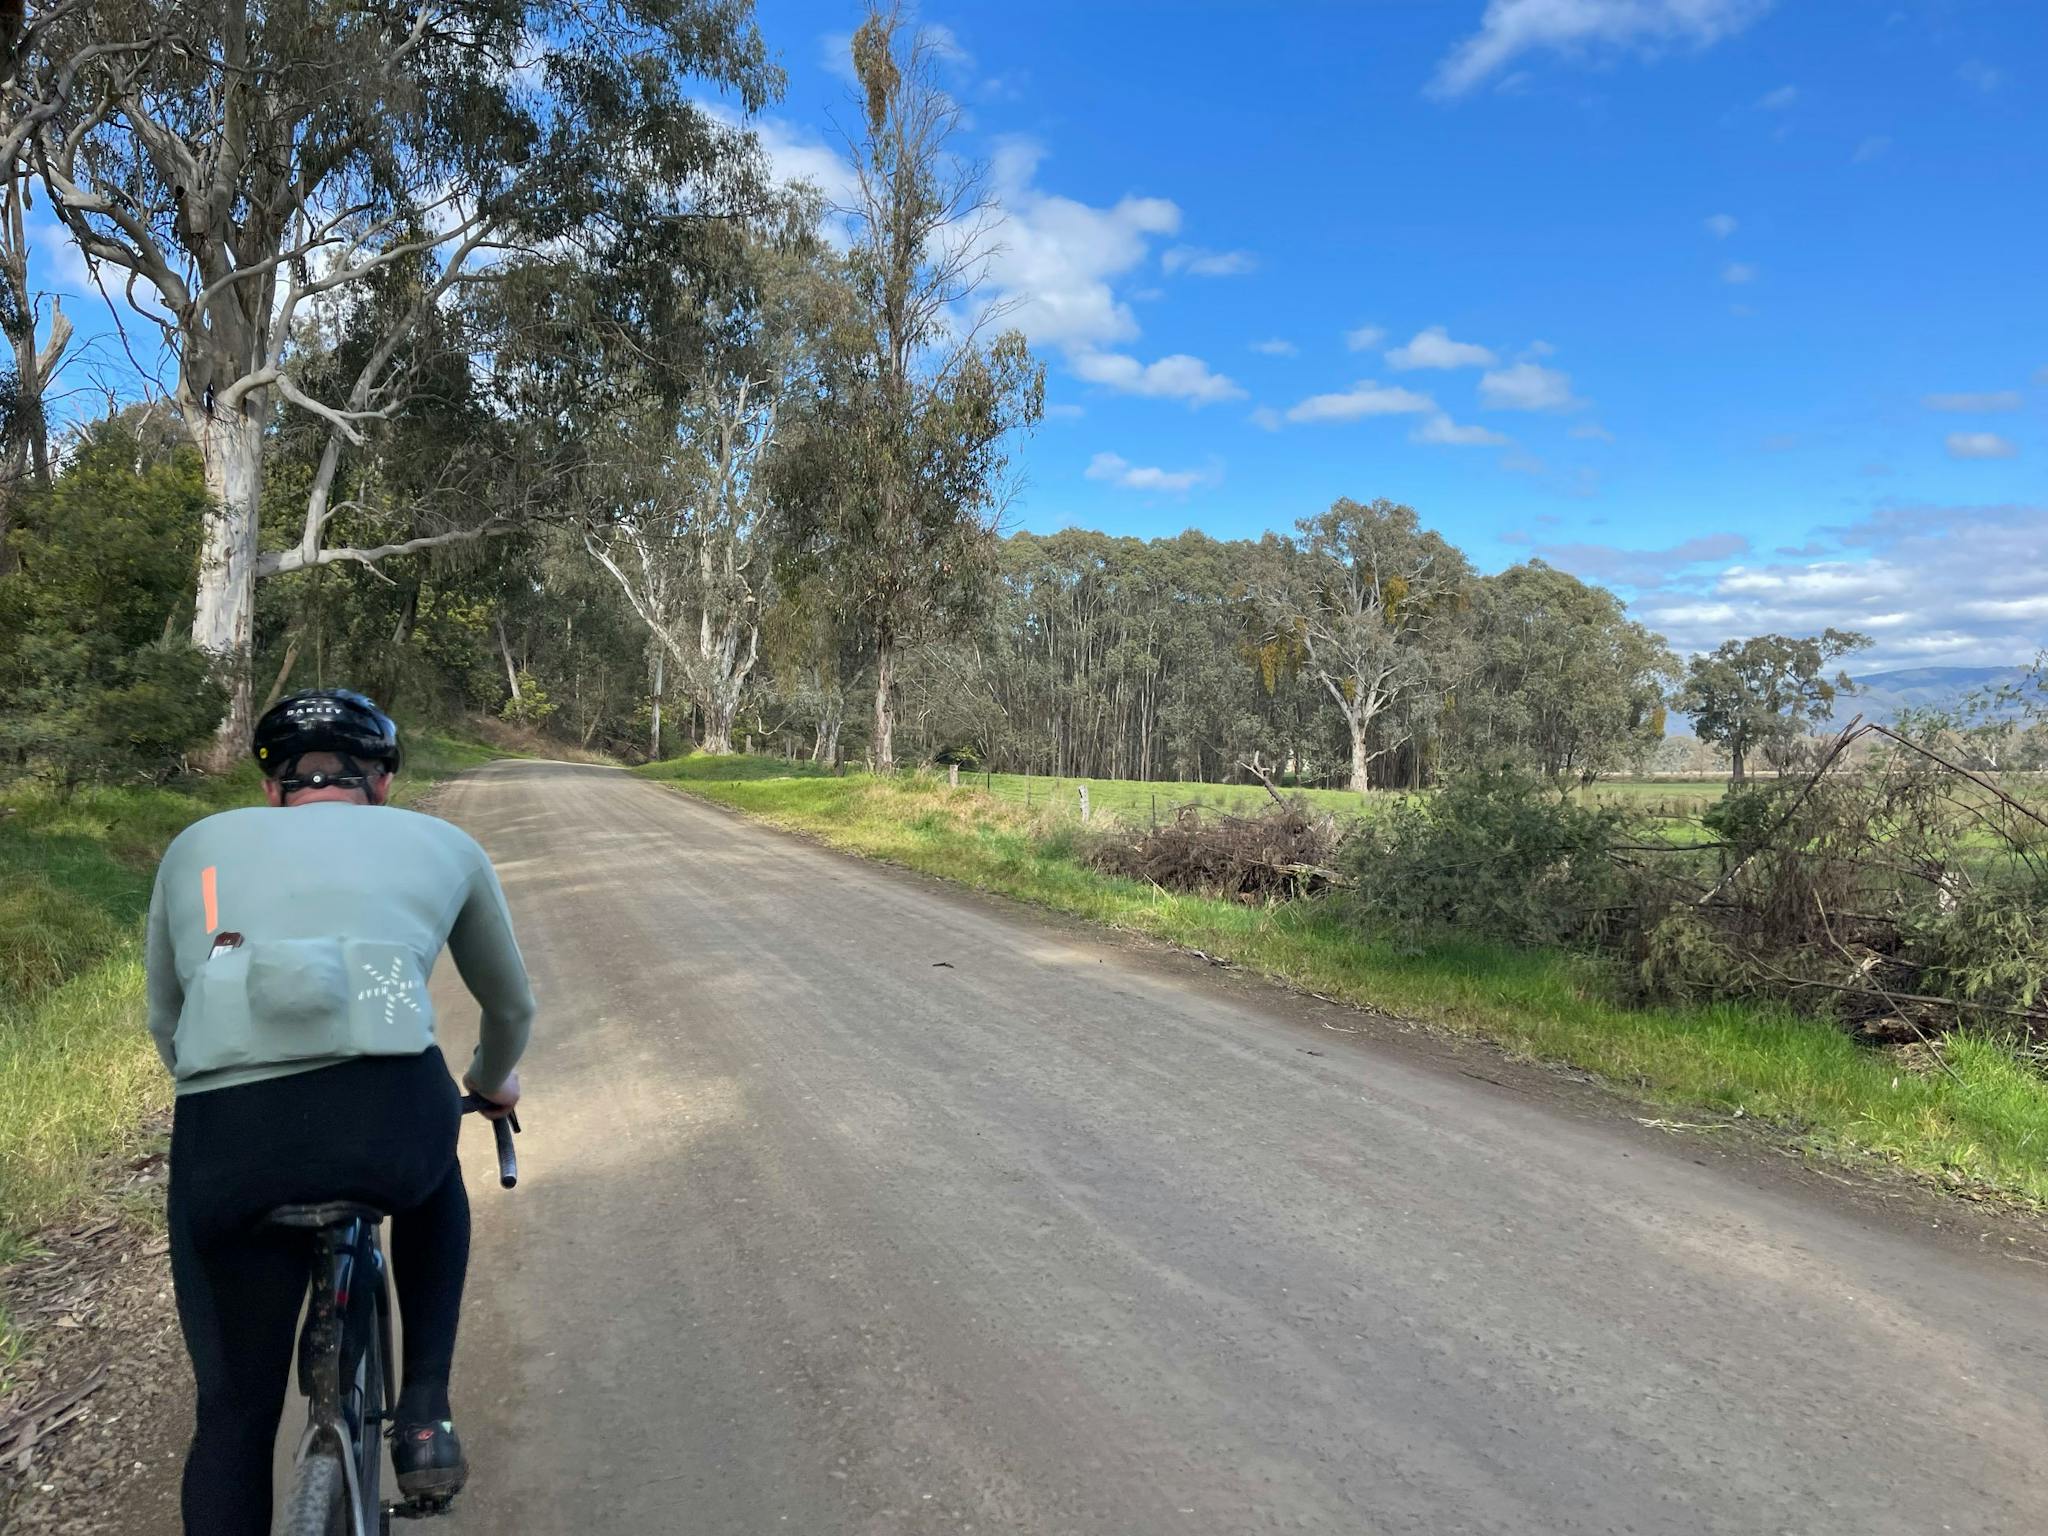 cyclist on side of gravel road, bushy trees on right green grass, gum trees, blue sky and clouds